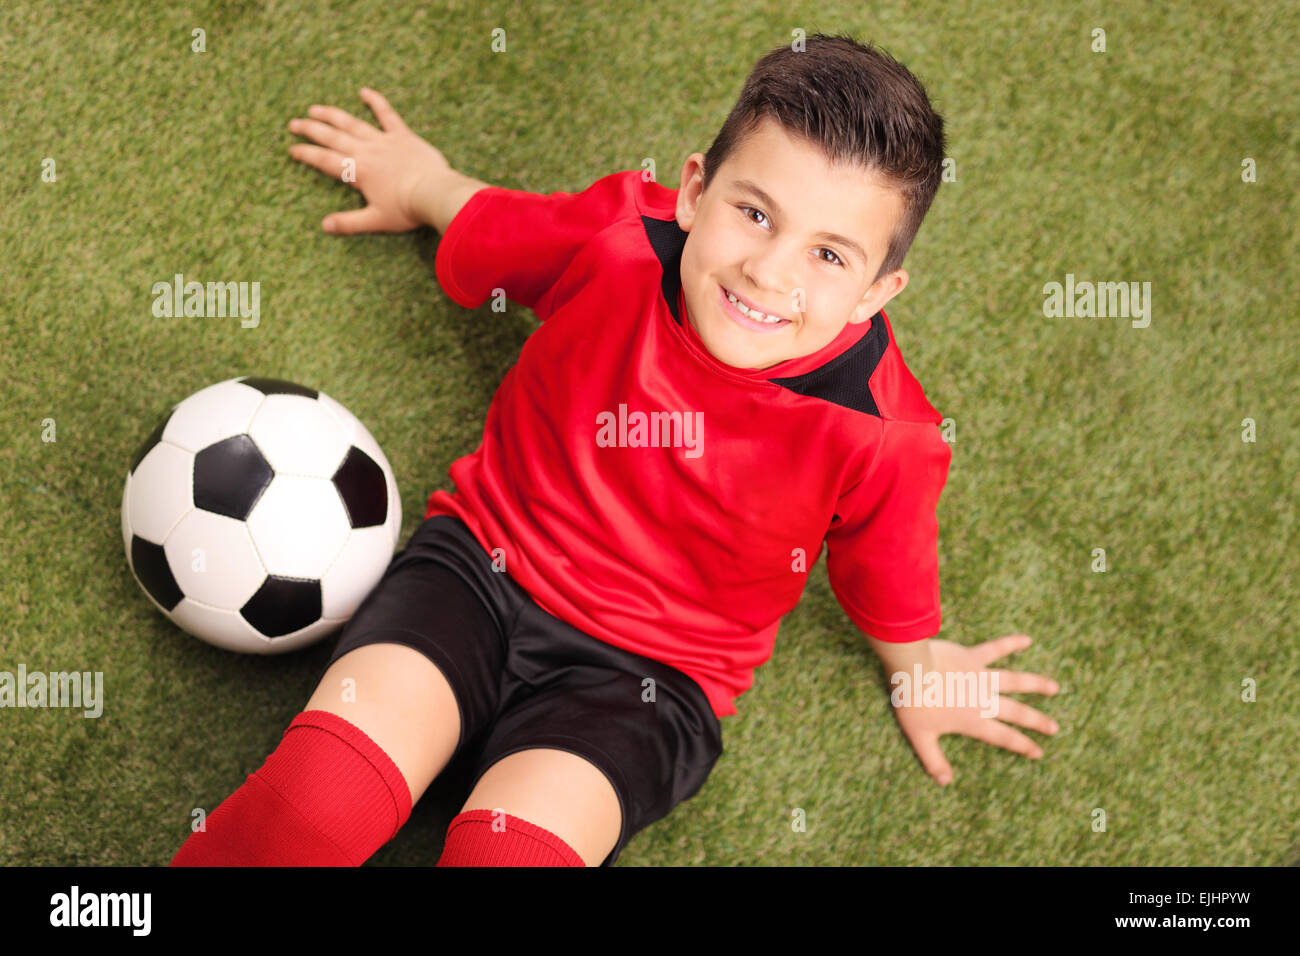 High angle shot of a junior soccer player in red jersey, sitting on a green field and looking at the camera, with a soccer ball Stock Photo